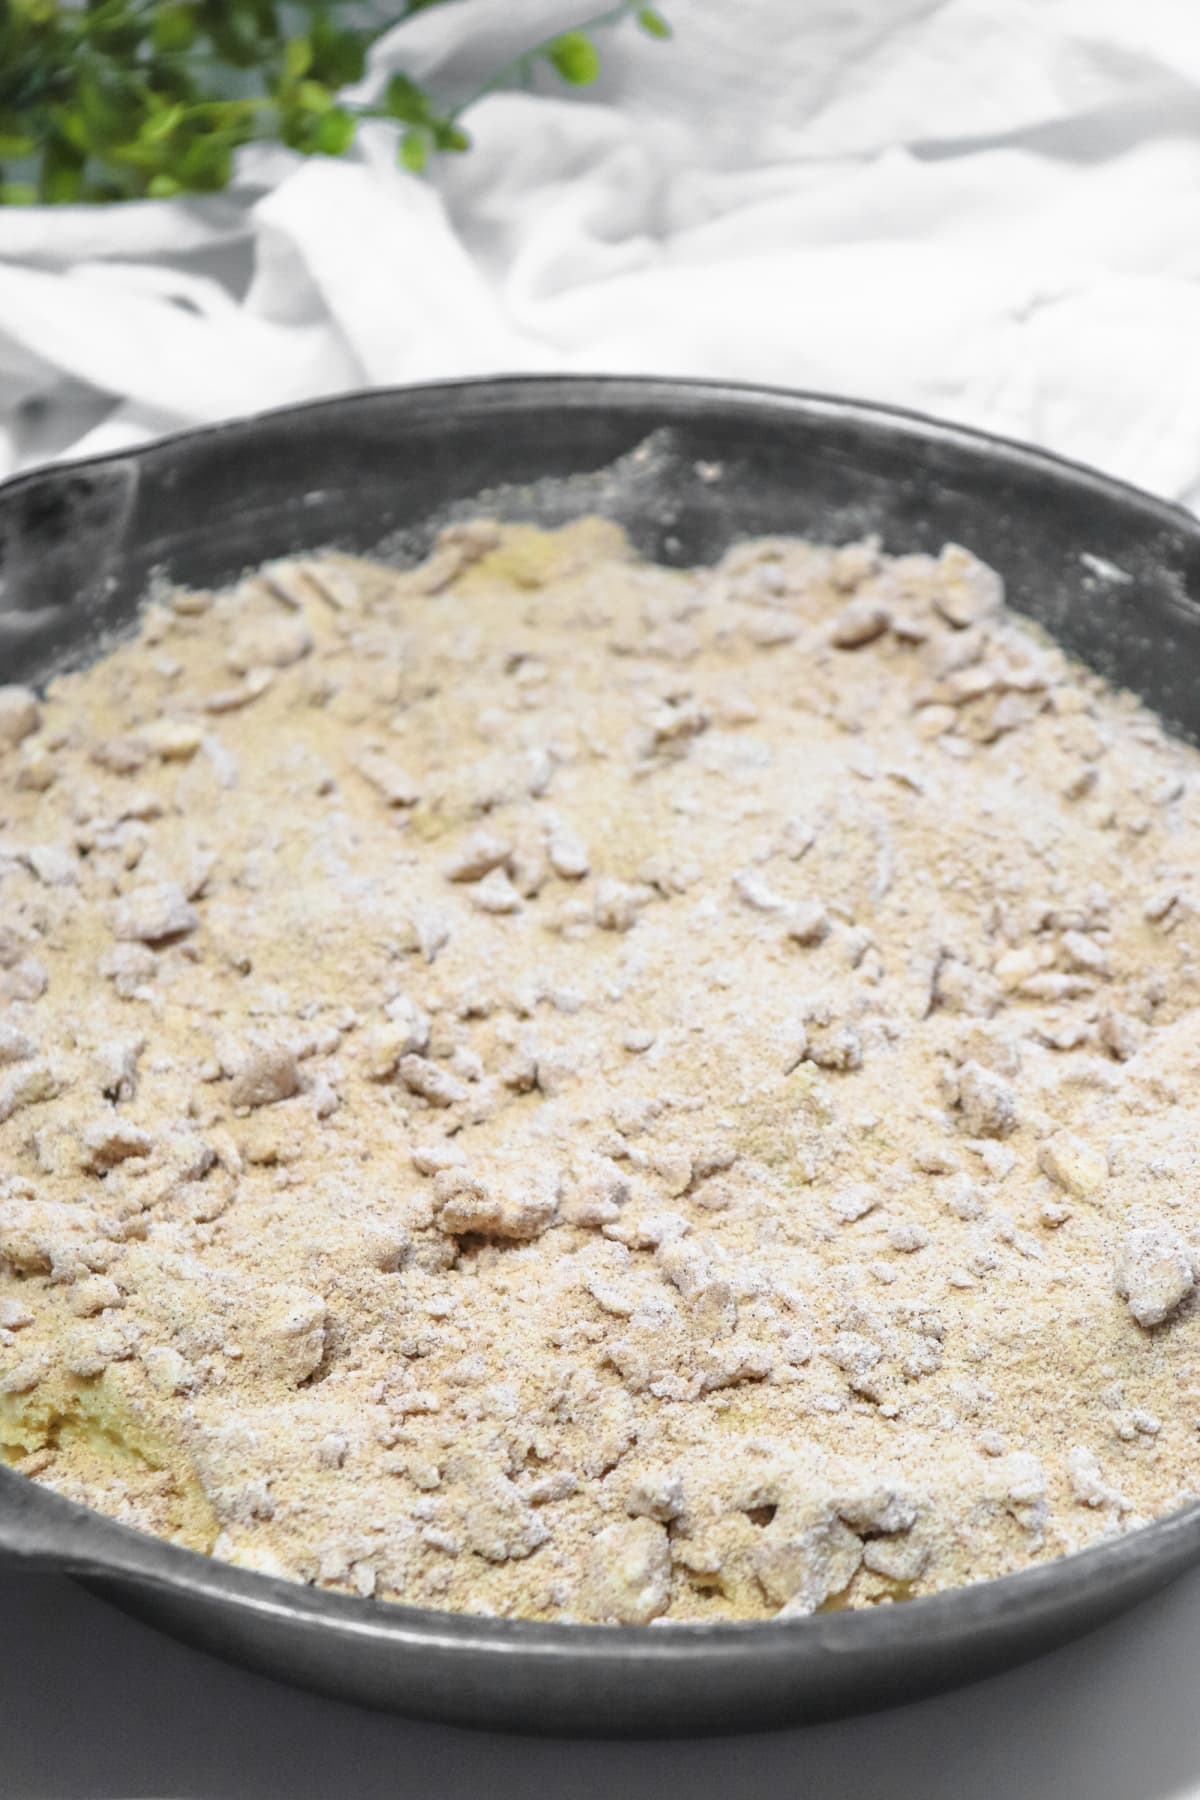 Coffee cake batter with topping sprinkled over top